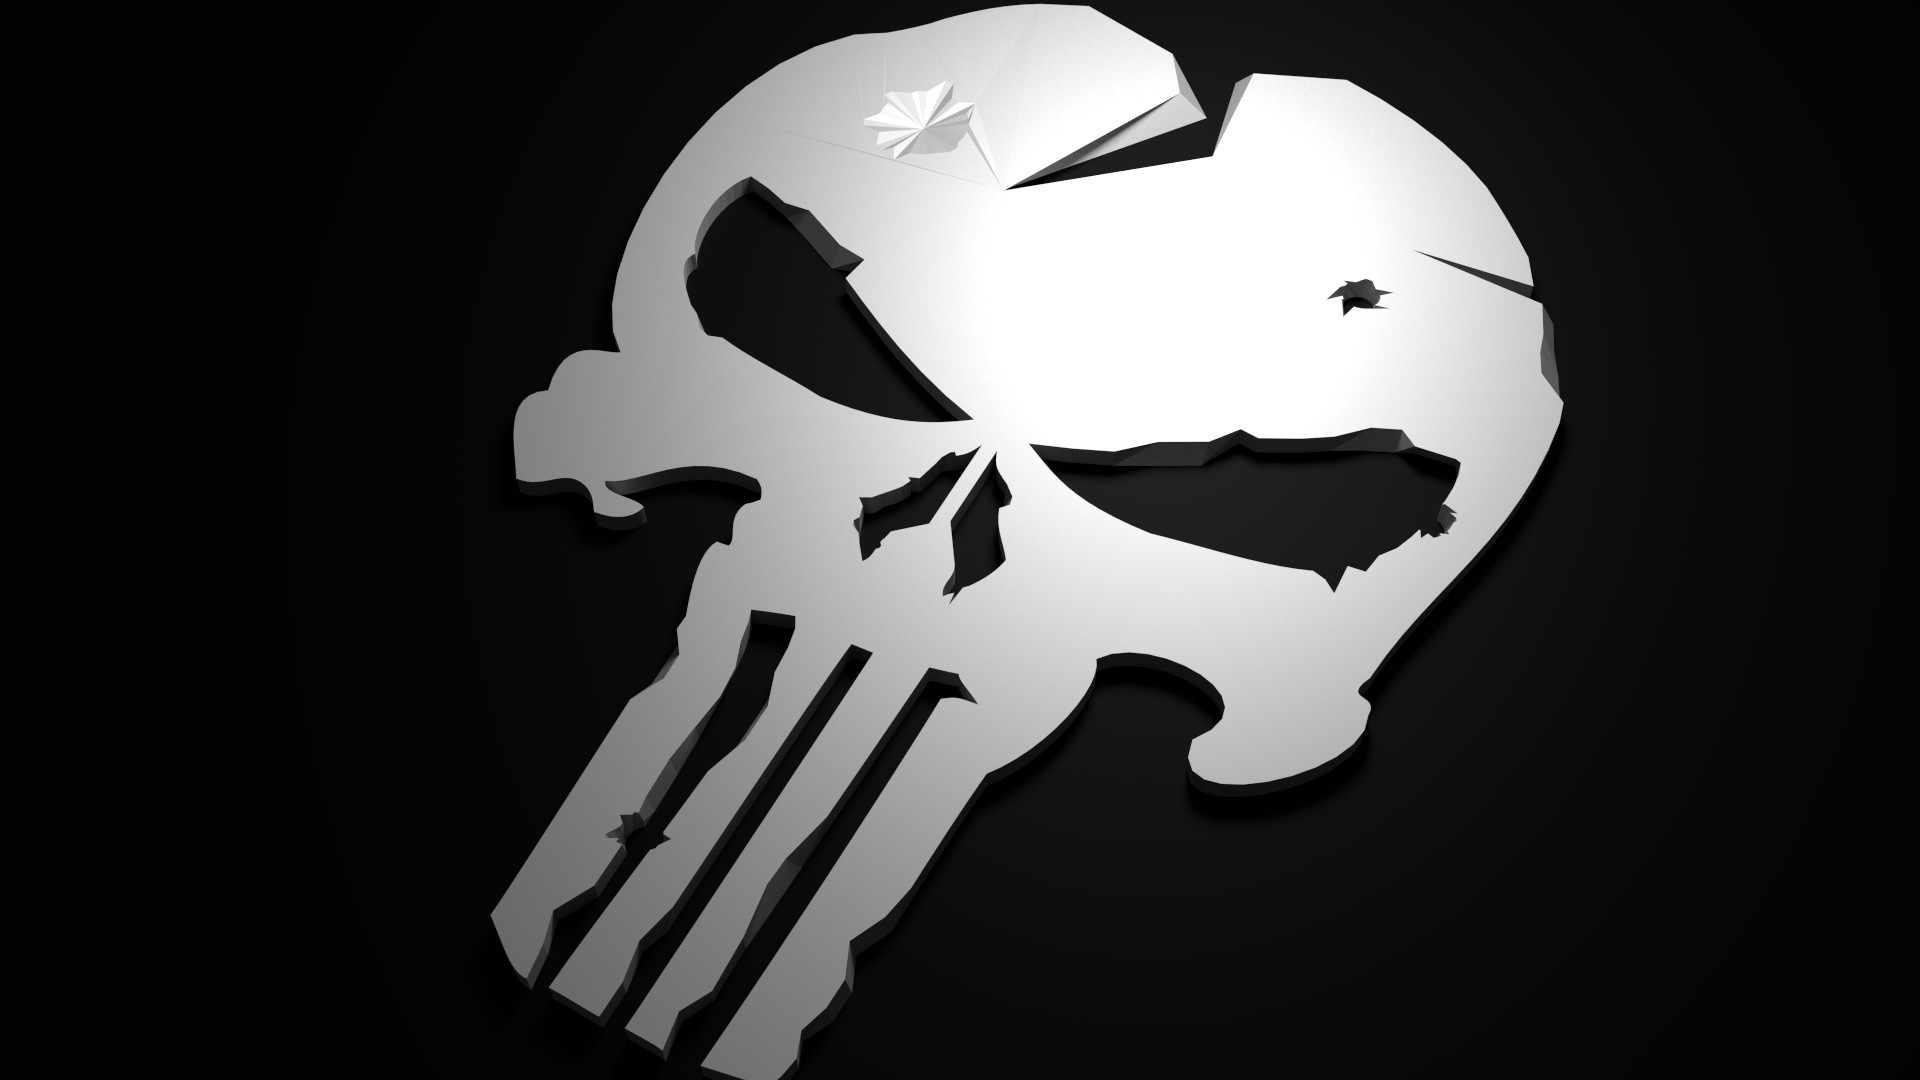 Low Poly Punisher Hd Wallpaper From Gallsource - Punisher Logo Wallpaper Hd - HD Wallpaper 